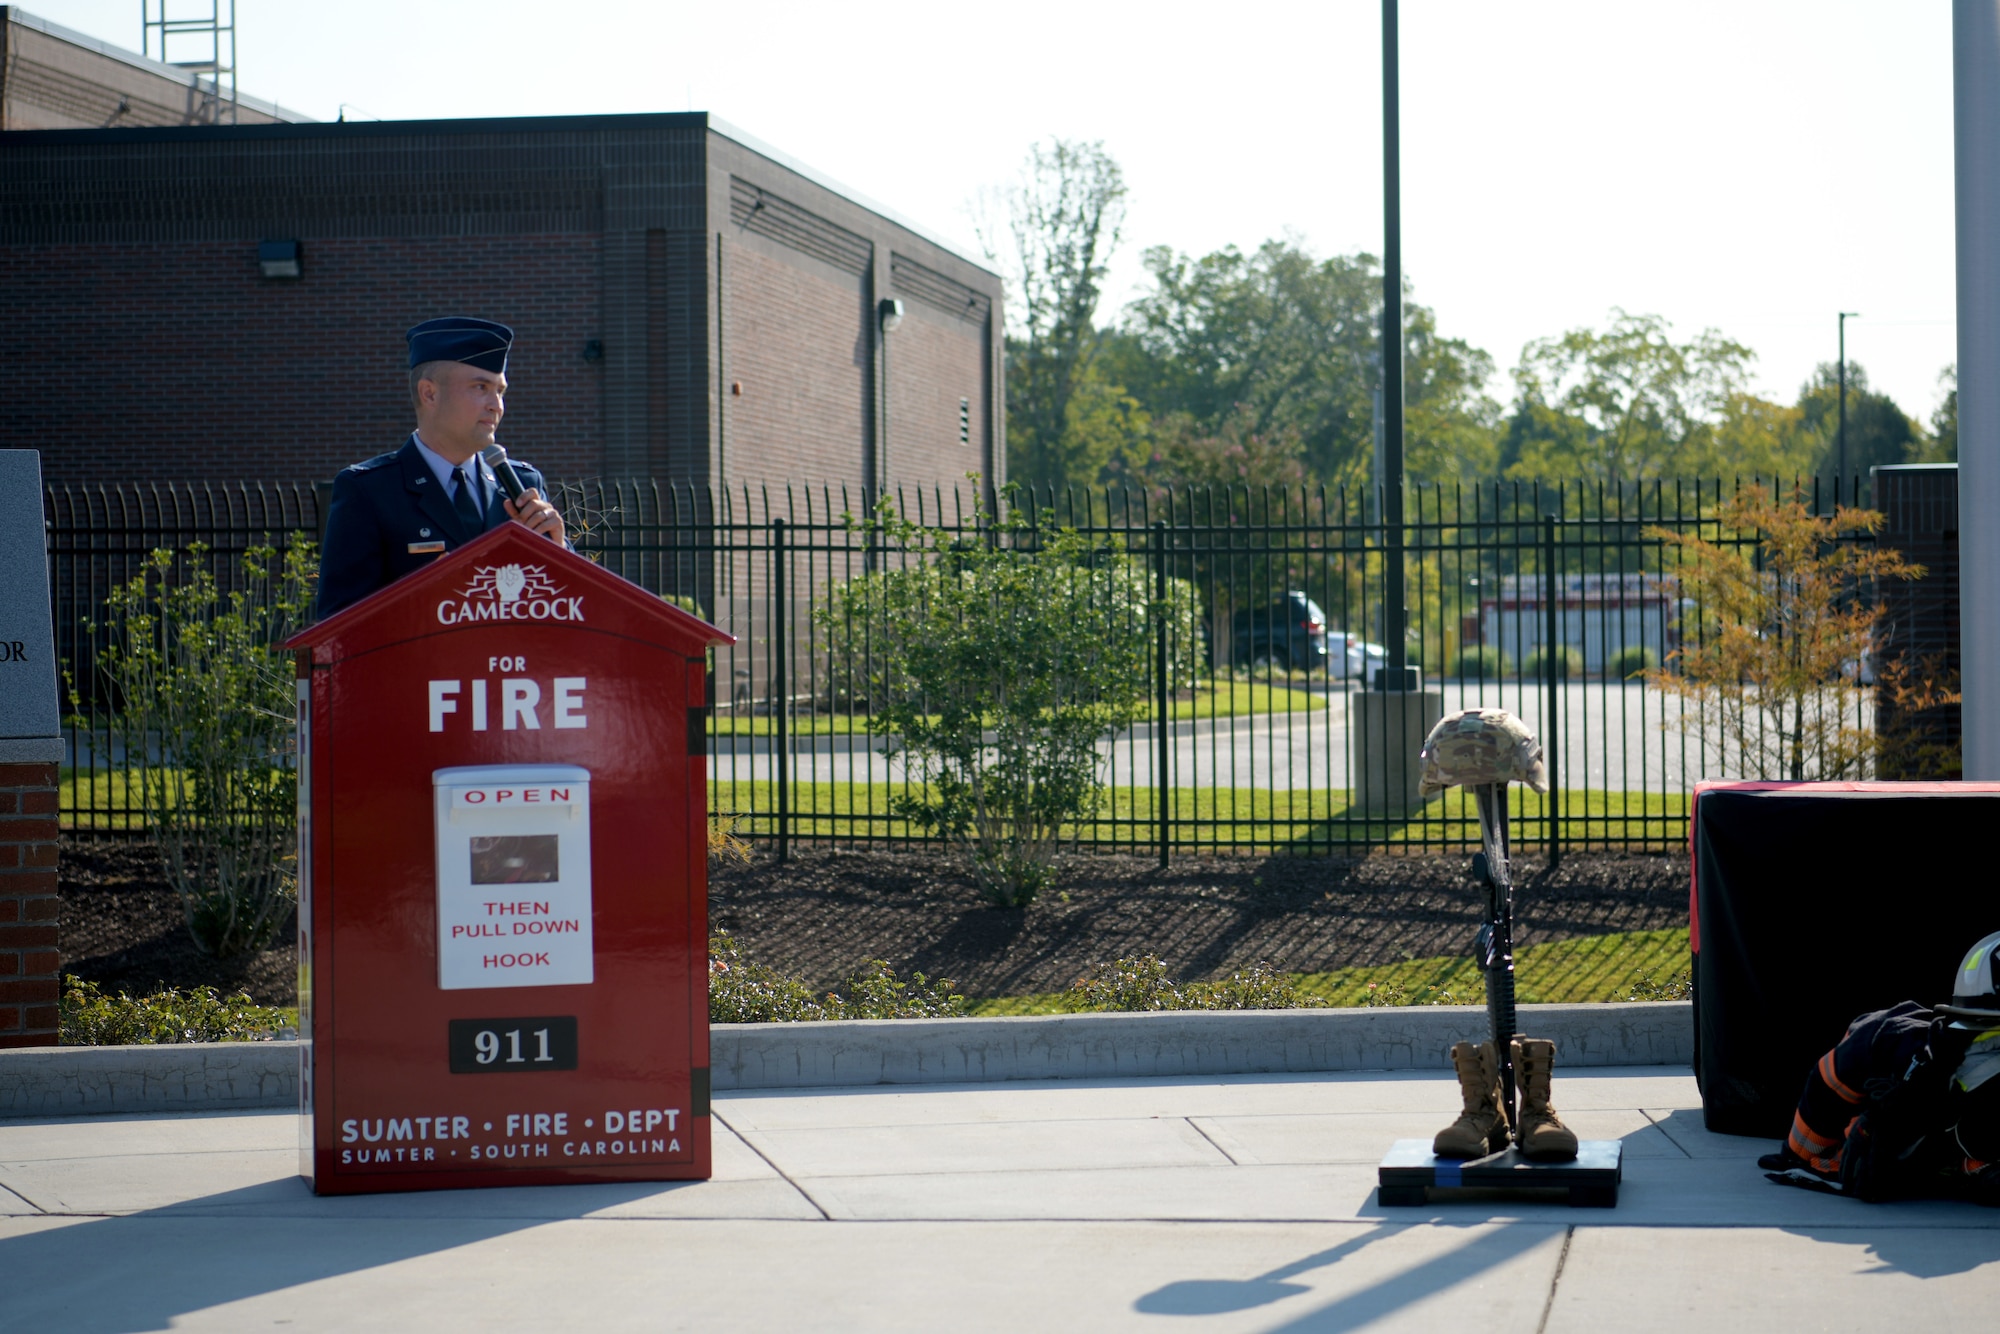 U.S. Air Force Col. Lawrence Sullivan, 20th Fighter Wing commander, speaks during a 9/11 memorial ceremony in Sumter, S.C., Sept. 11, 2021. The ceremony was held in remembrance of the 20th anniversary of the Sept. 11, 2001, attacks across the United States. (U.S. Air Force photo by Staff Sgt. K. Tucker Owen)